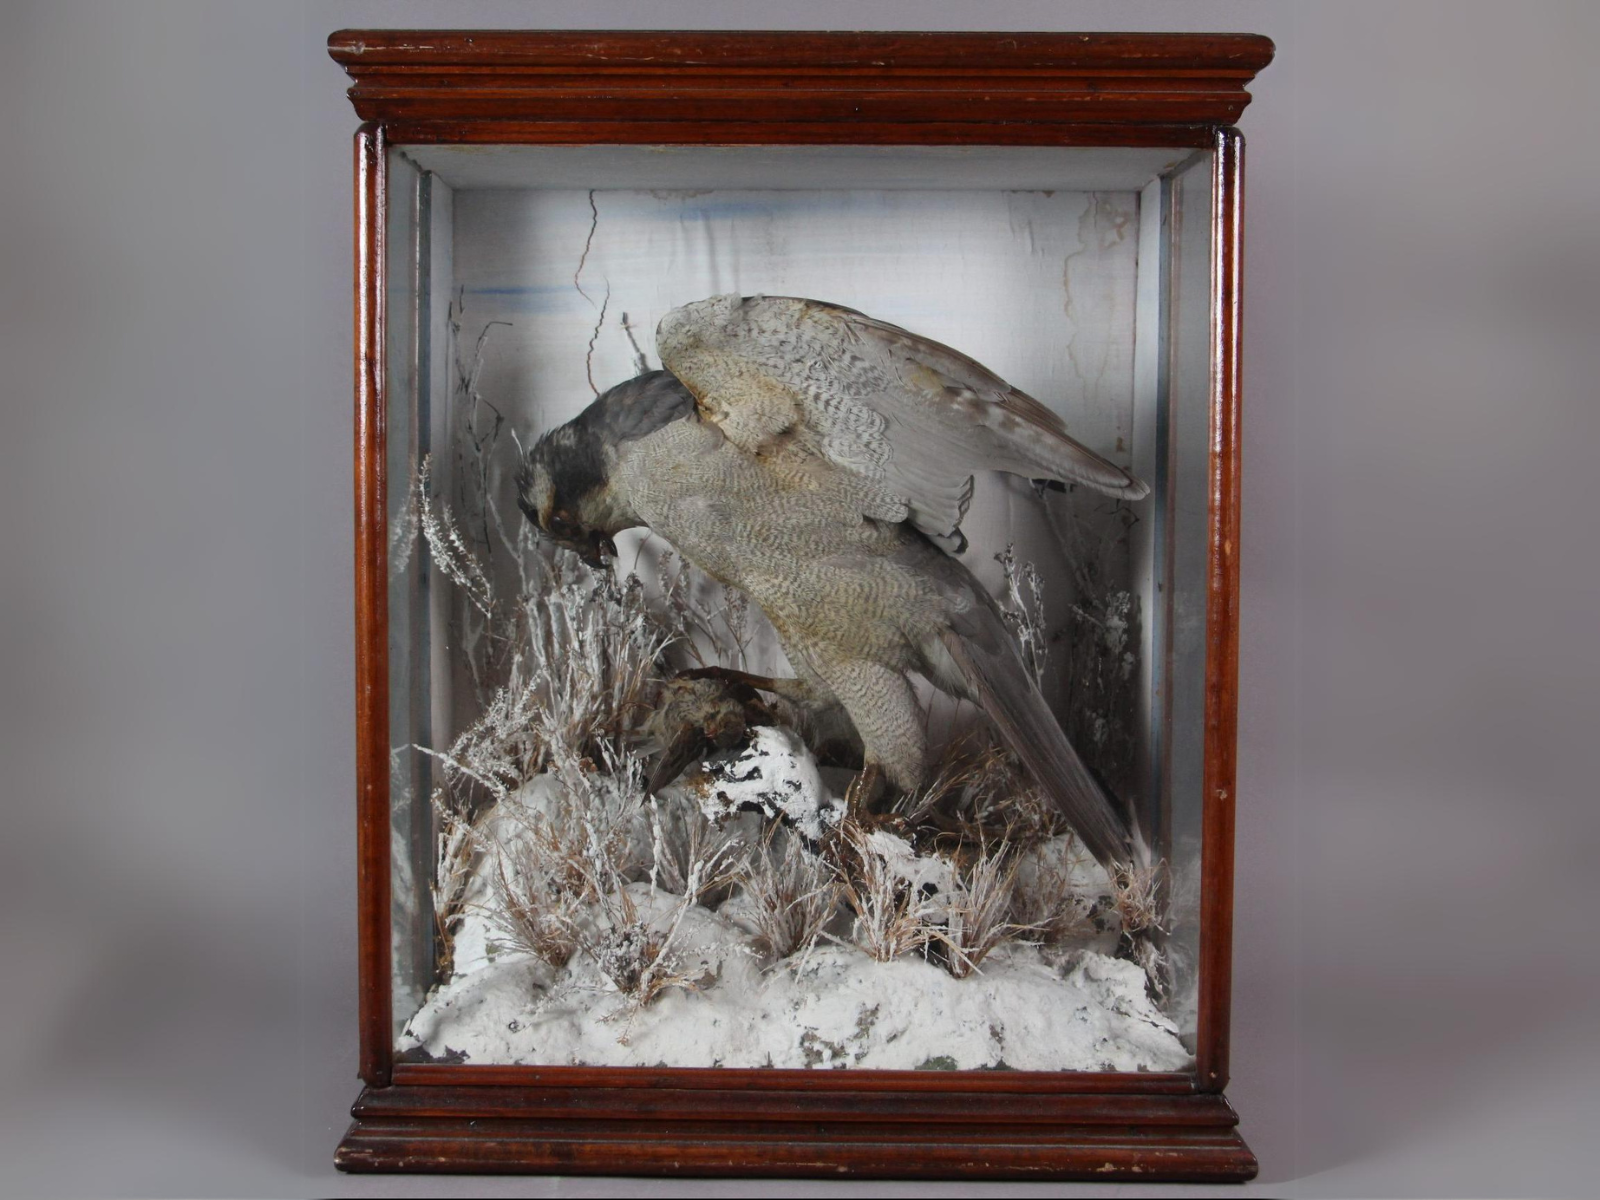 A wood and glass parlour case containing a Goshawk specimen standing over its prey, a Vesper sparrow, in a snowy landscape.